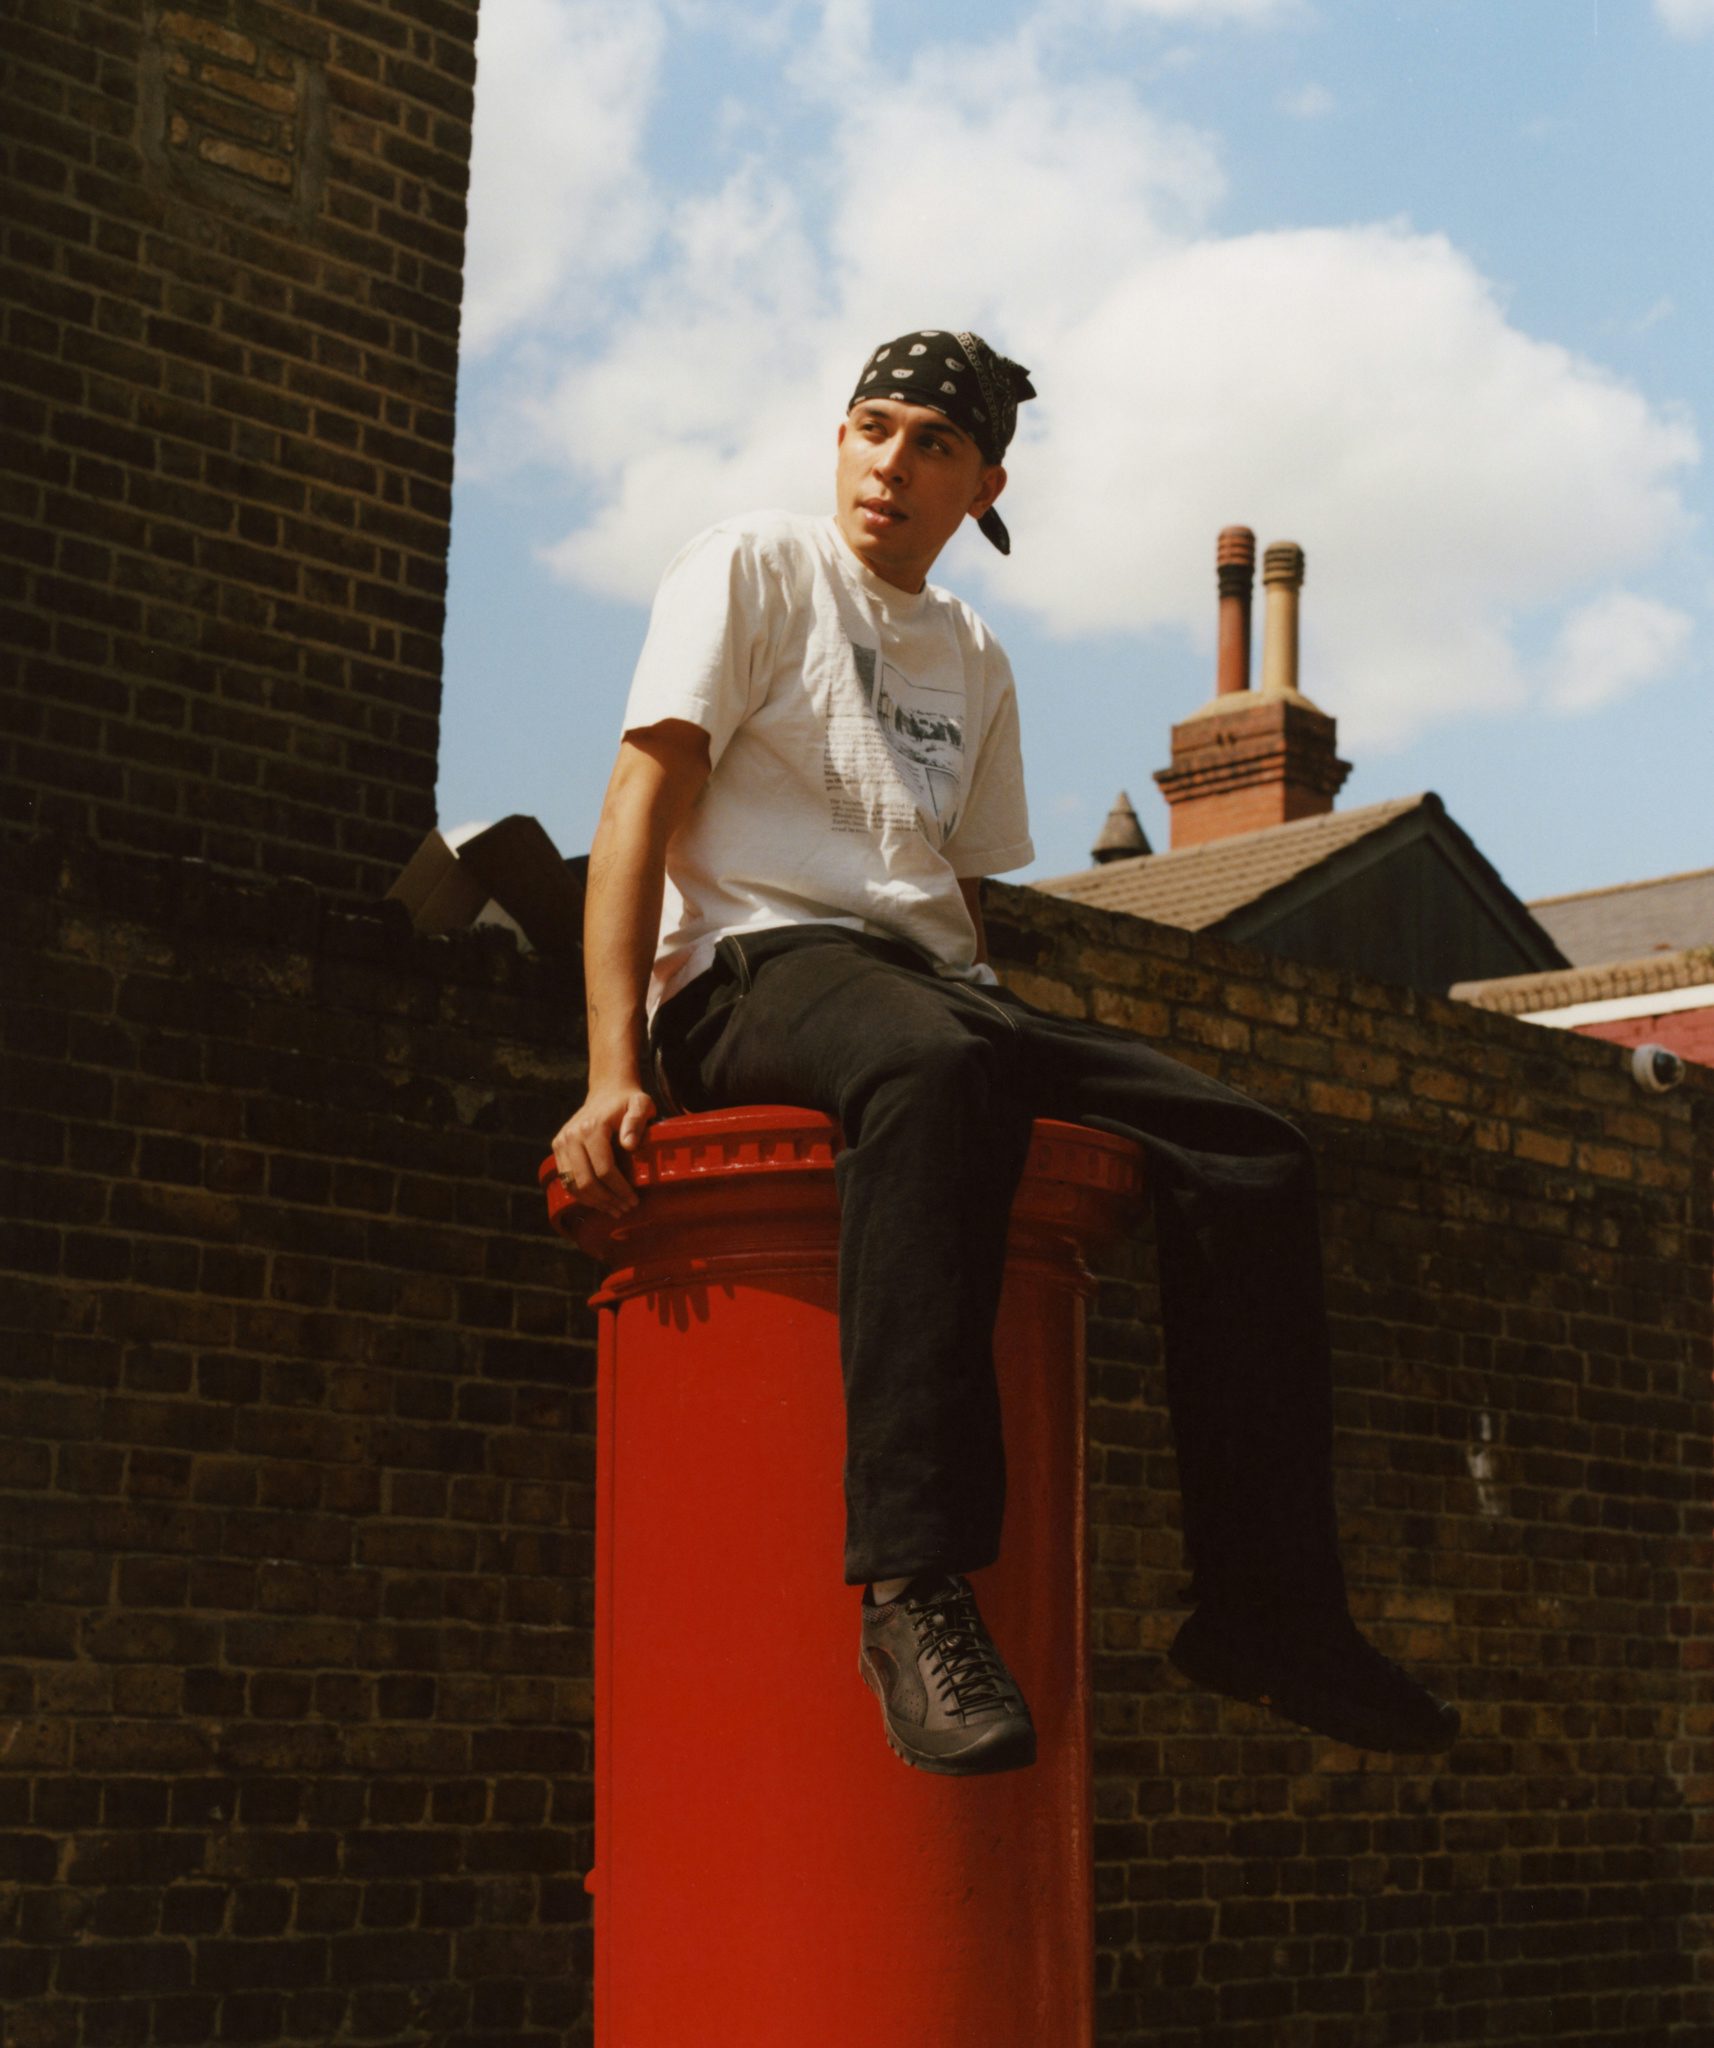 Photograph by Niall Hodson of a young person in a bandana sat on top of a red post box